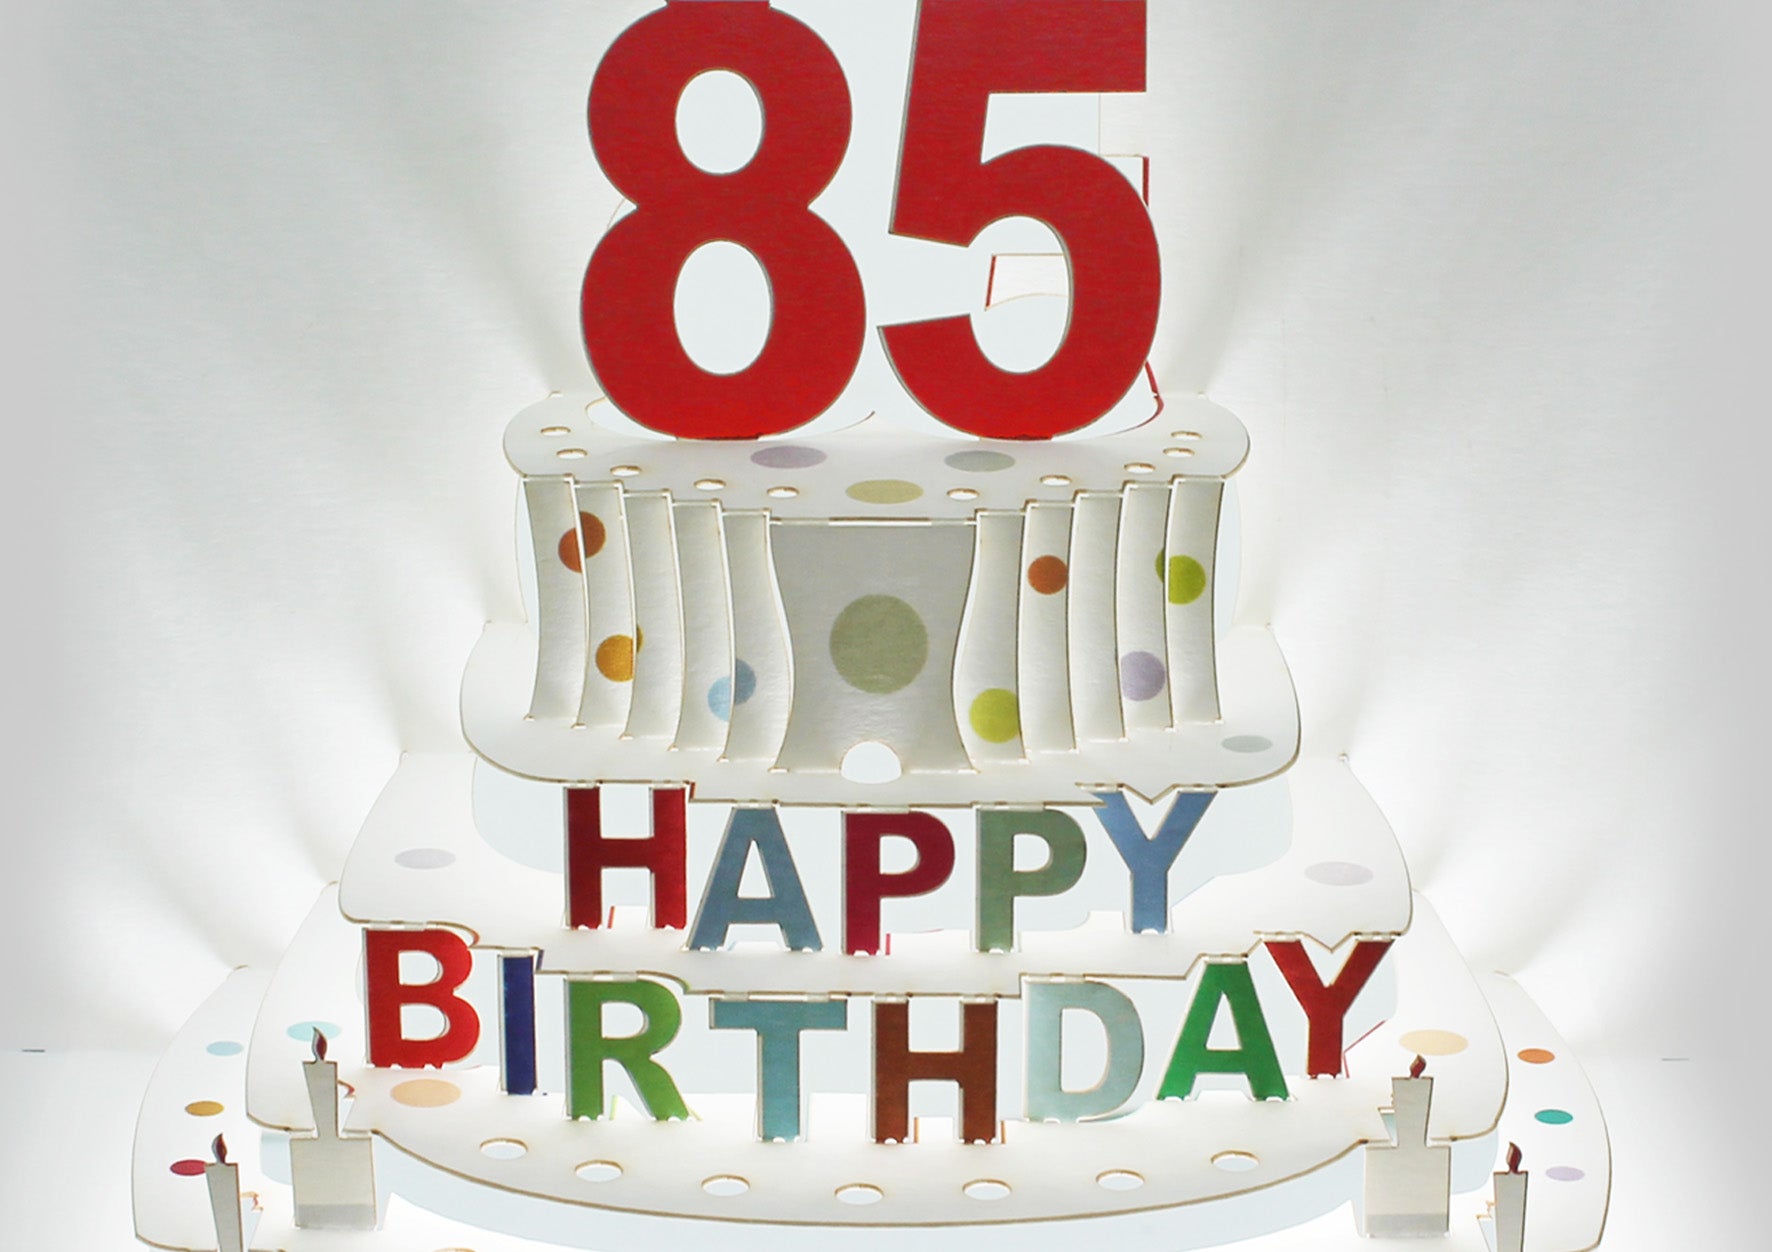 Happy 85th Birthday 3D Pop Up Greetings Card